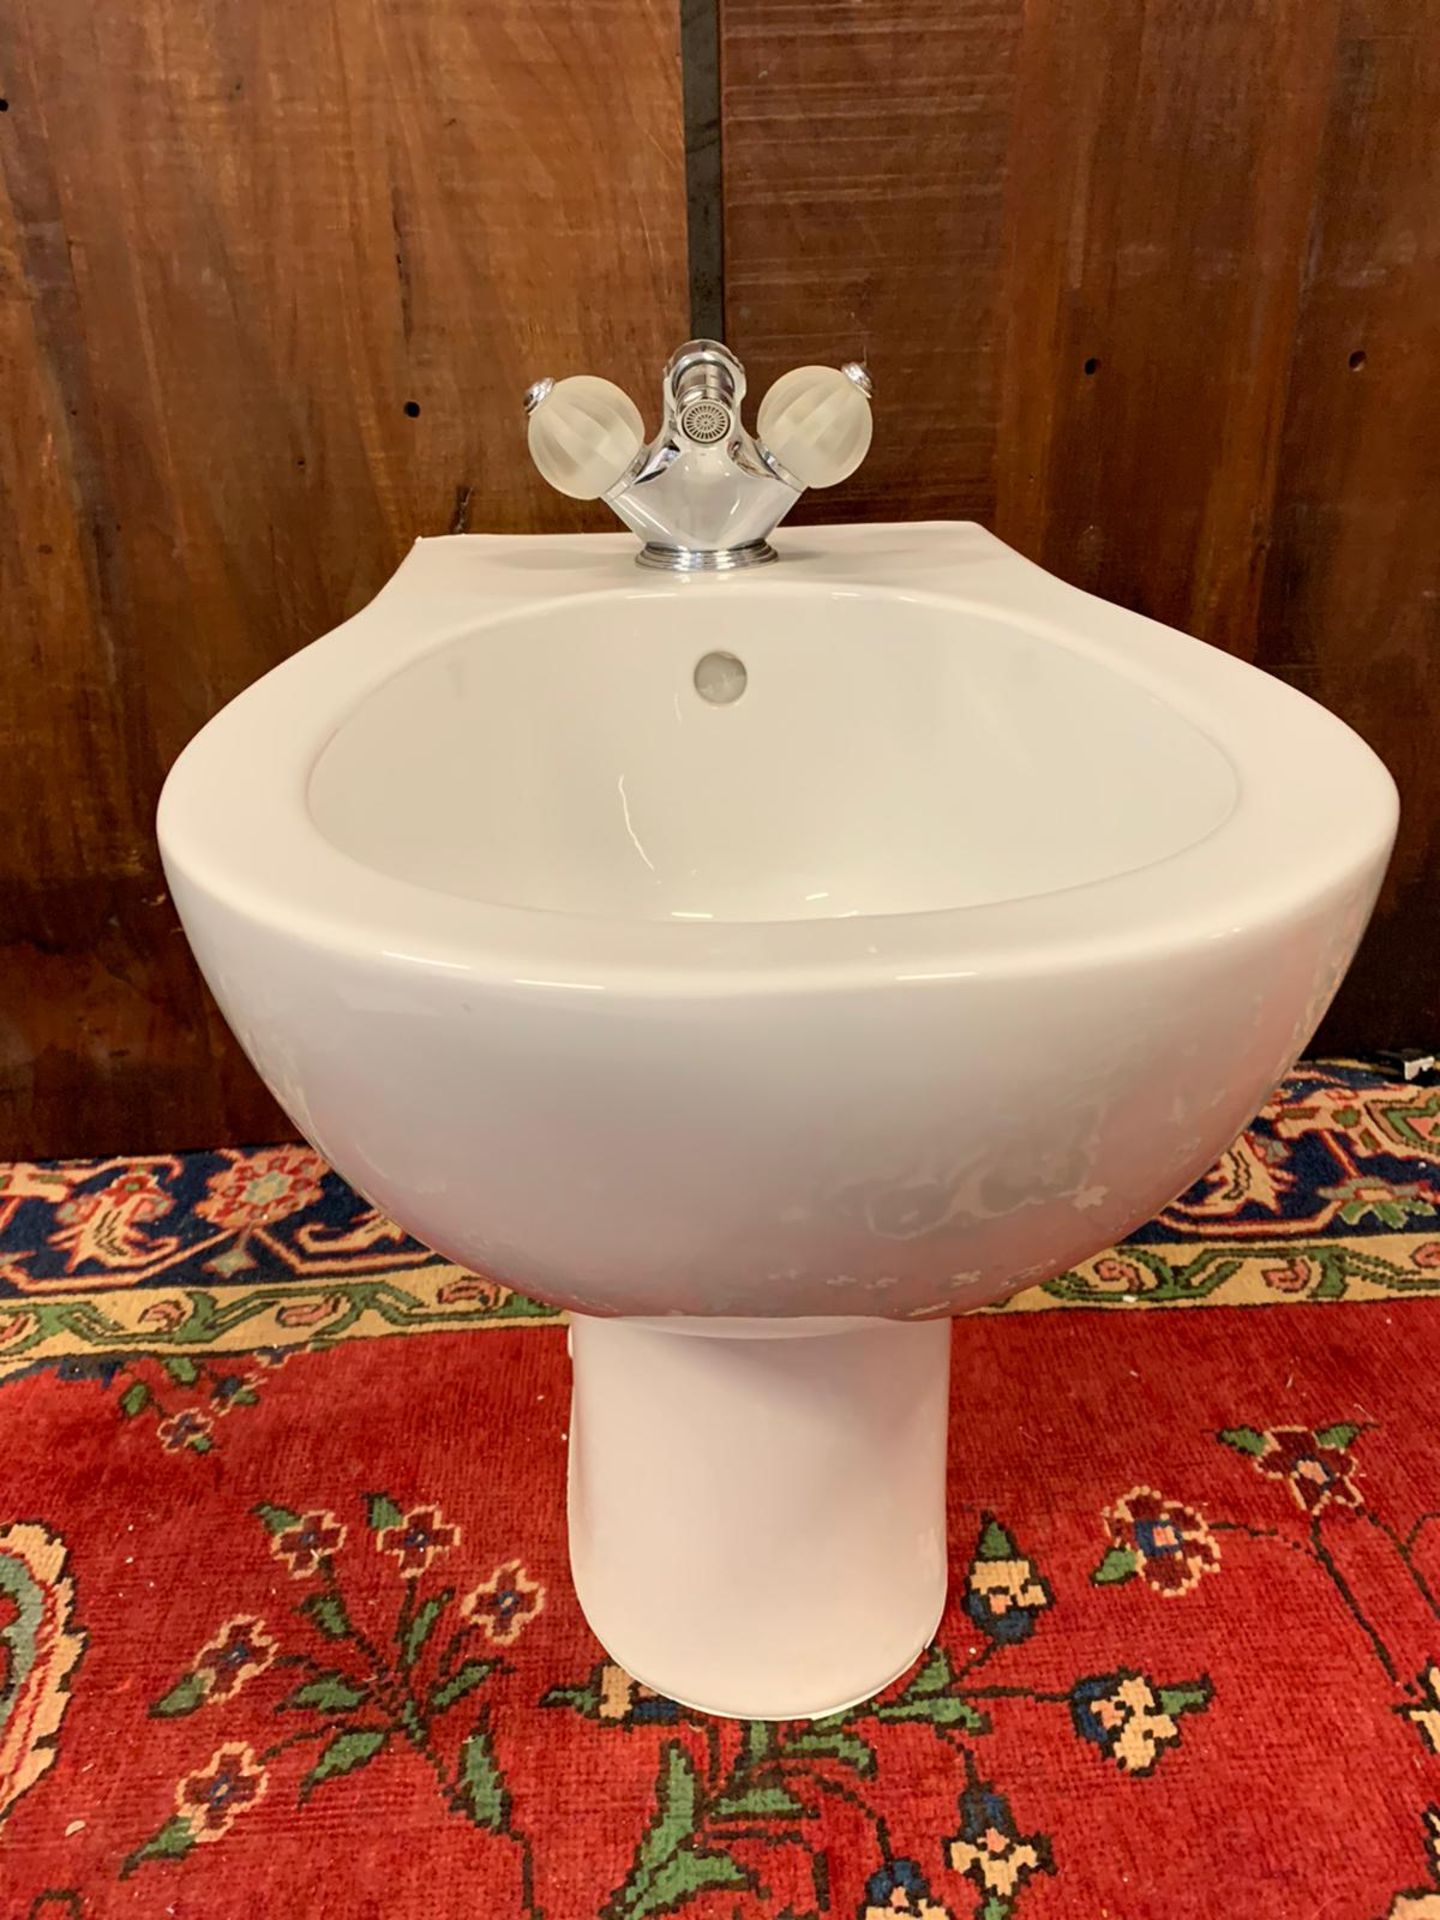 BIDET BASIN WITH LUXURY FAUCET TAPS BY JEAN-CLAUDE DELEPINE